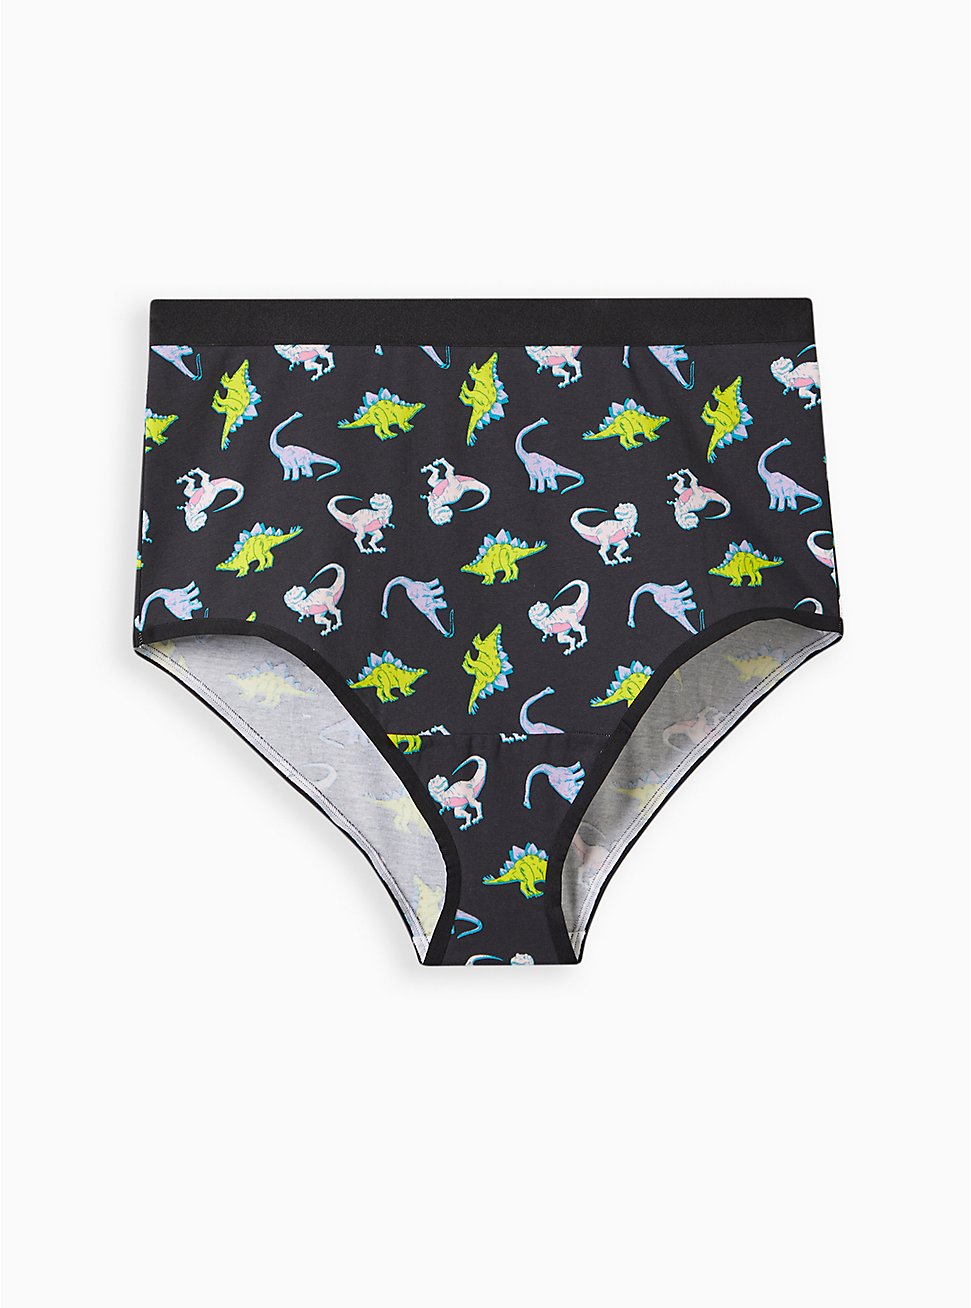 Plus Size Cotton High-Rise Cheeky Panty, DINO TOSS BLACK, hi-res